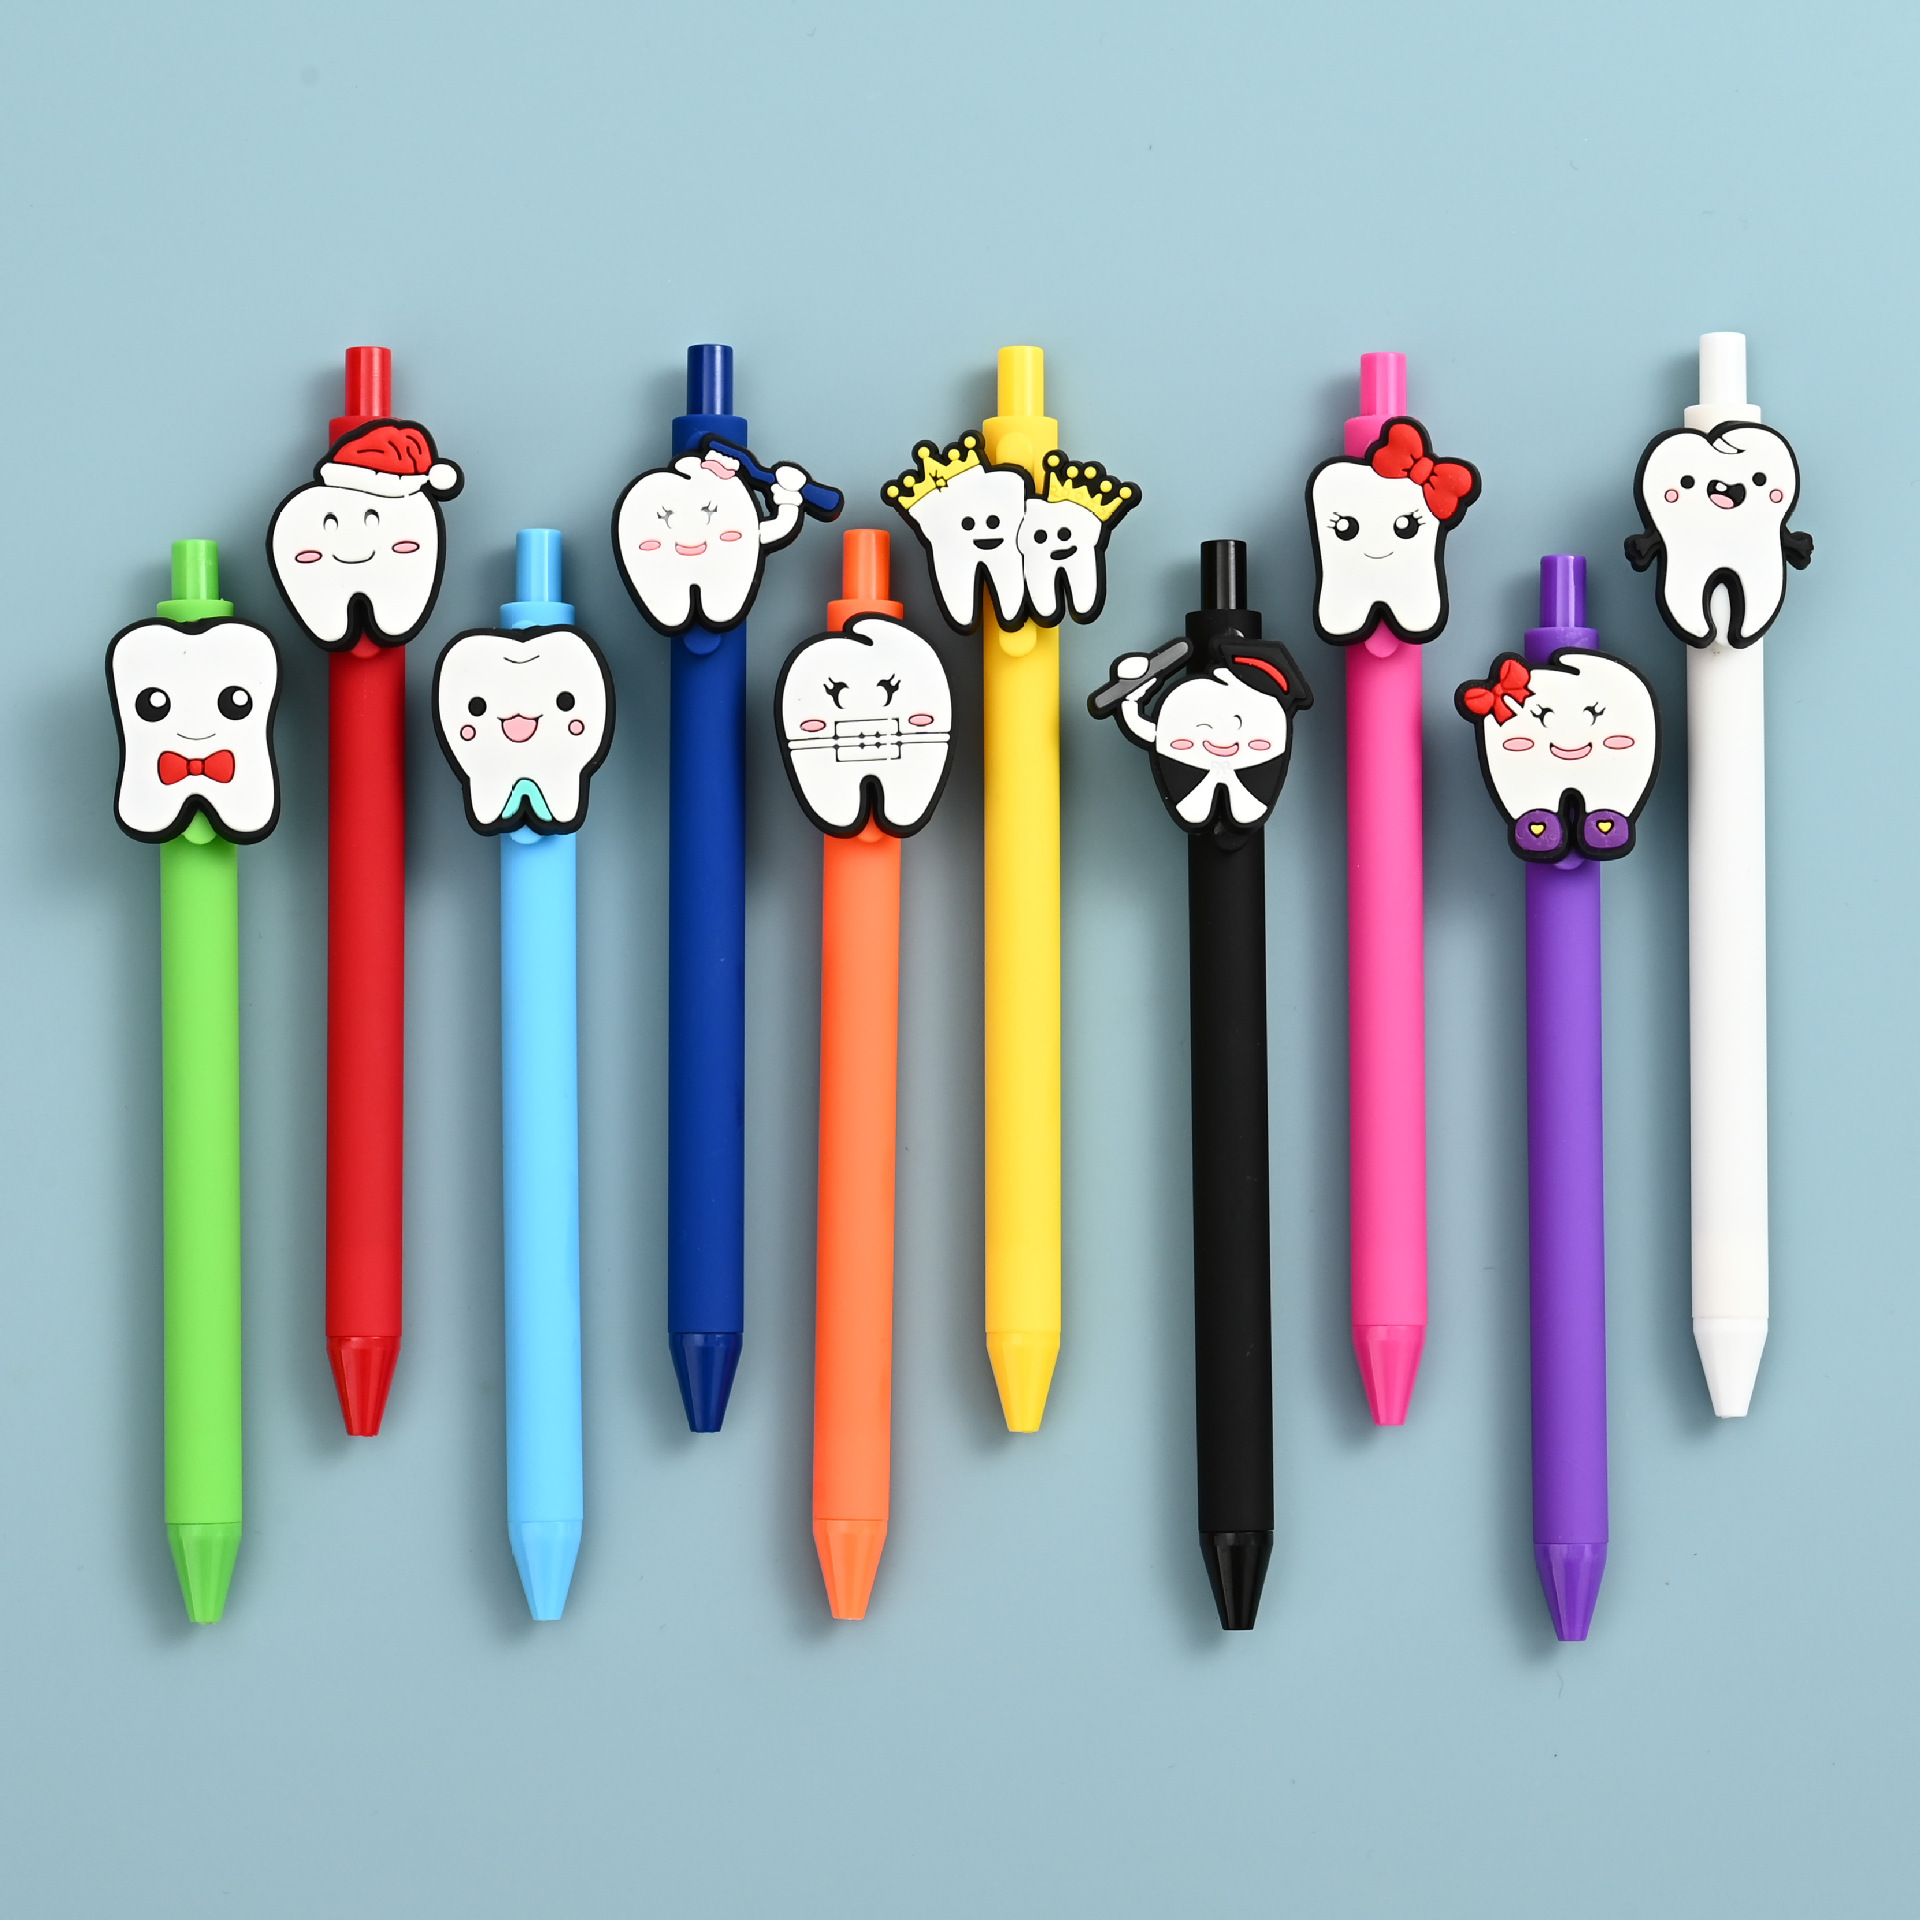 

5pcs Nurse & Tooth Design Gel Ink Rollerball Pens - Medium Point, Personalized Cartoon Dental-themed Pens, Creative Plastic Writing Instruments With Soft Touch, Assorted Colors